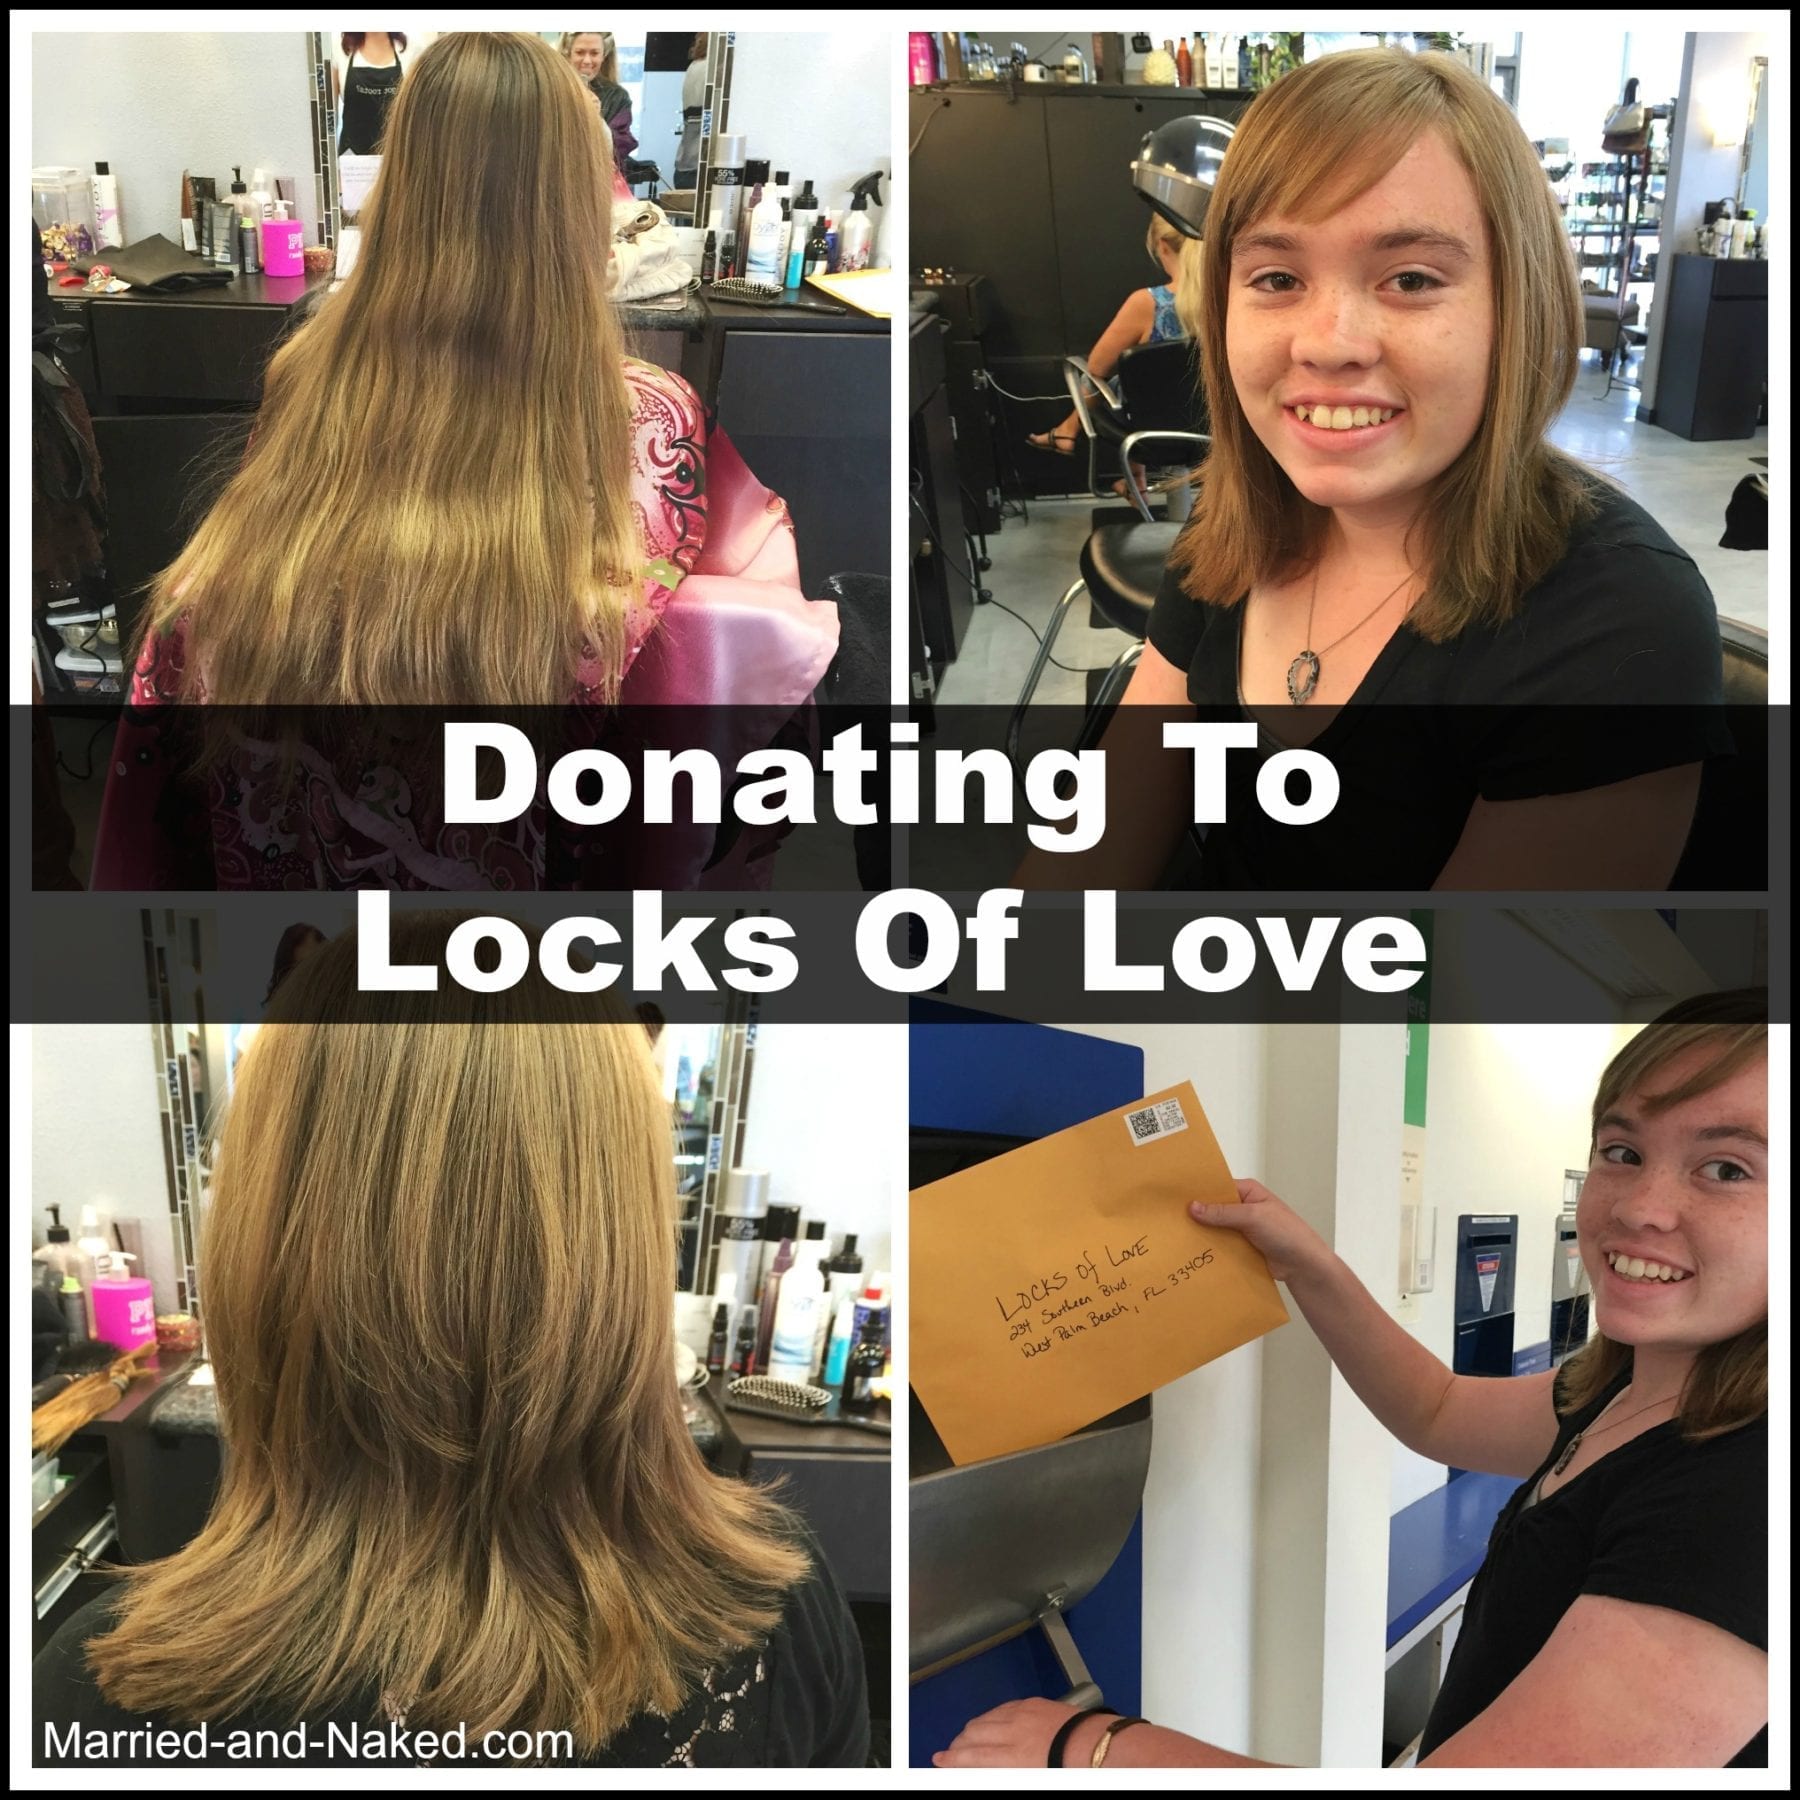 Lessons From A 12 Year Old - Donate to Locks of Love